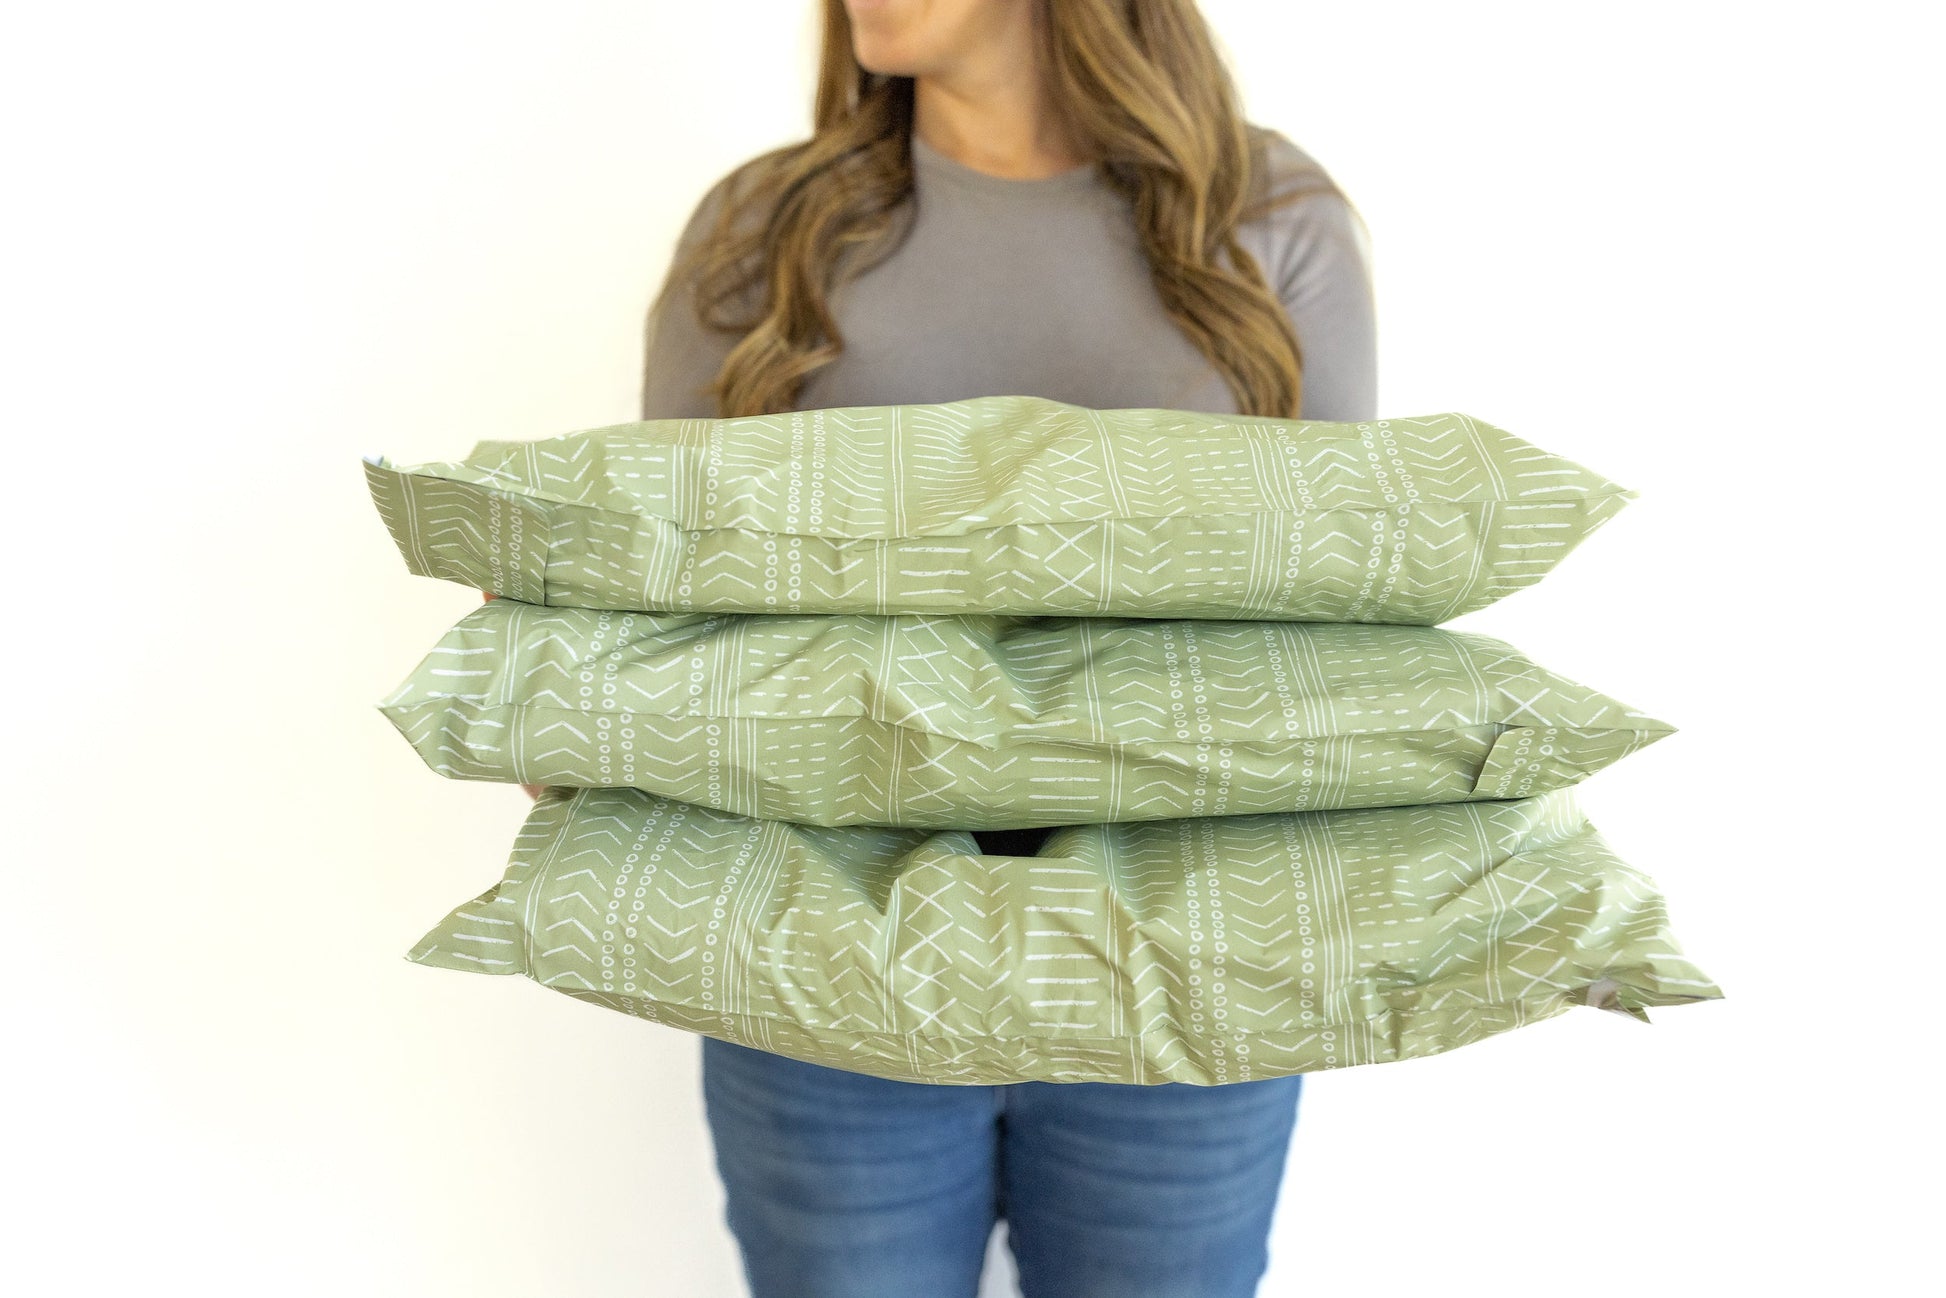 Extra Large mailing bags in a green color for shipping clothing and soft items.